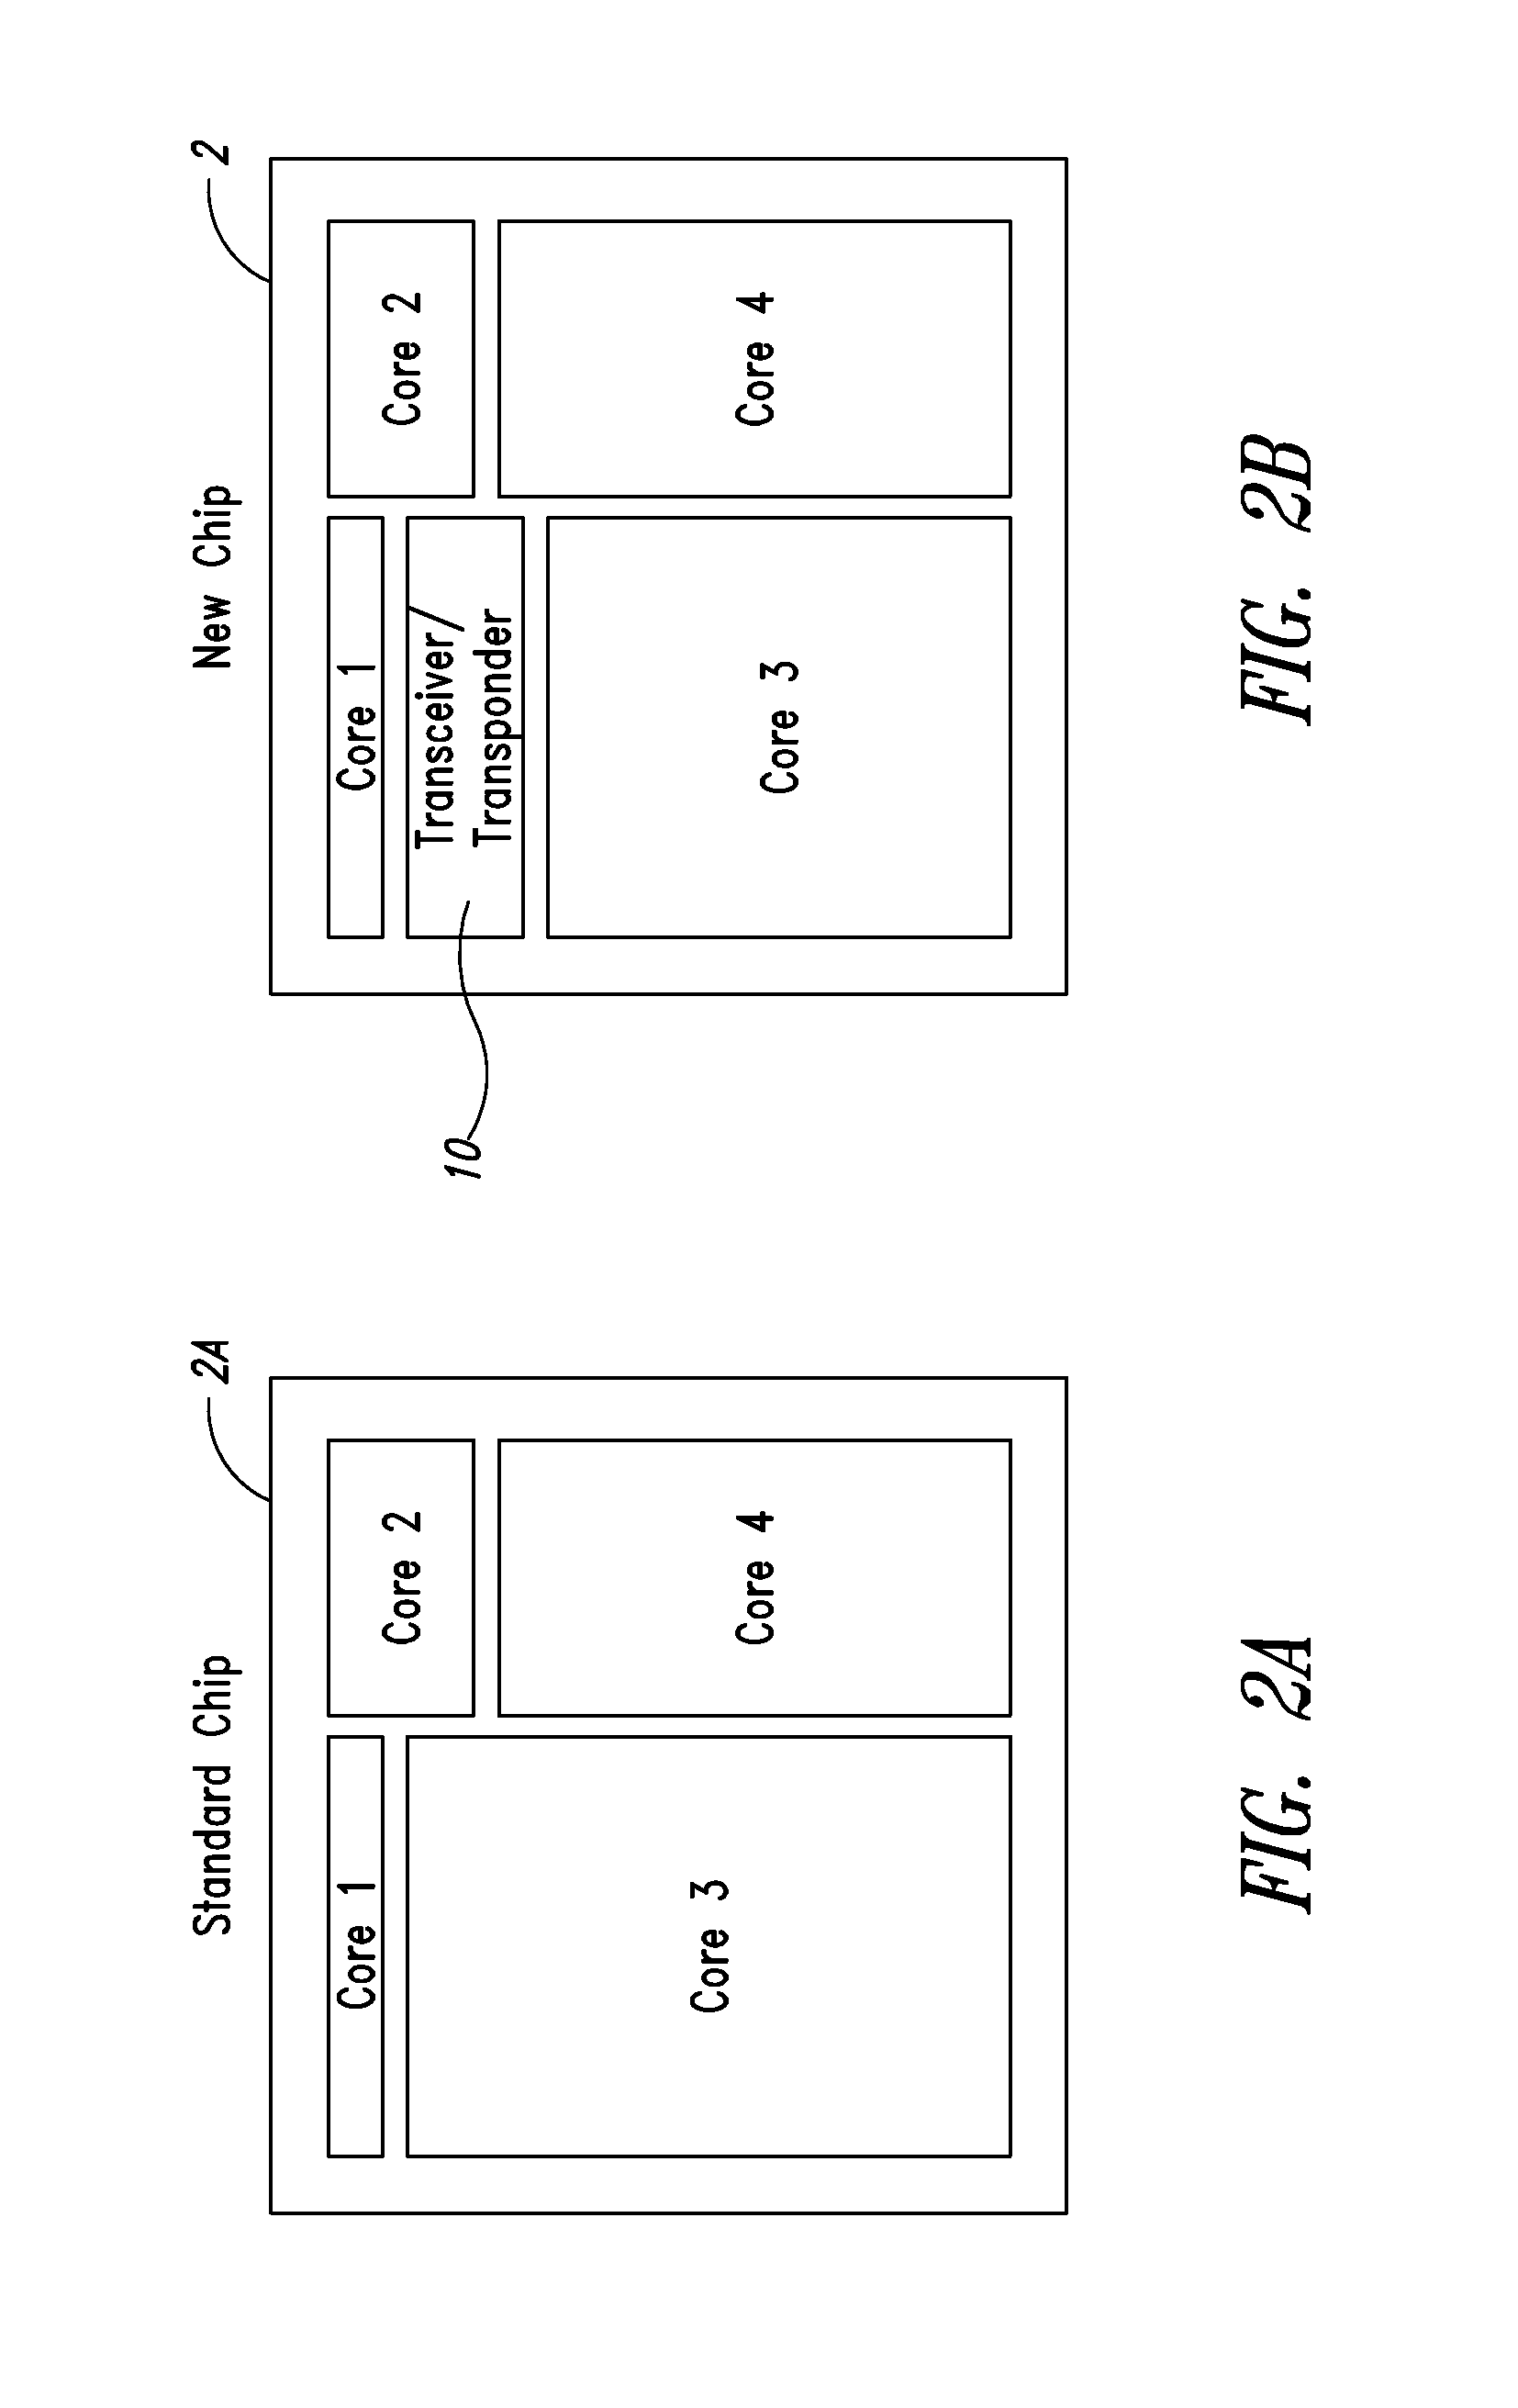 Circuit architecture for the parallel supplying during electric or electromagnetic testing of a plurality of electronic devices integrated on a semiconductor wafer